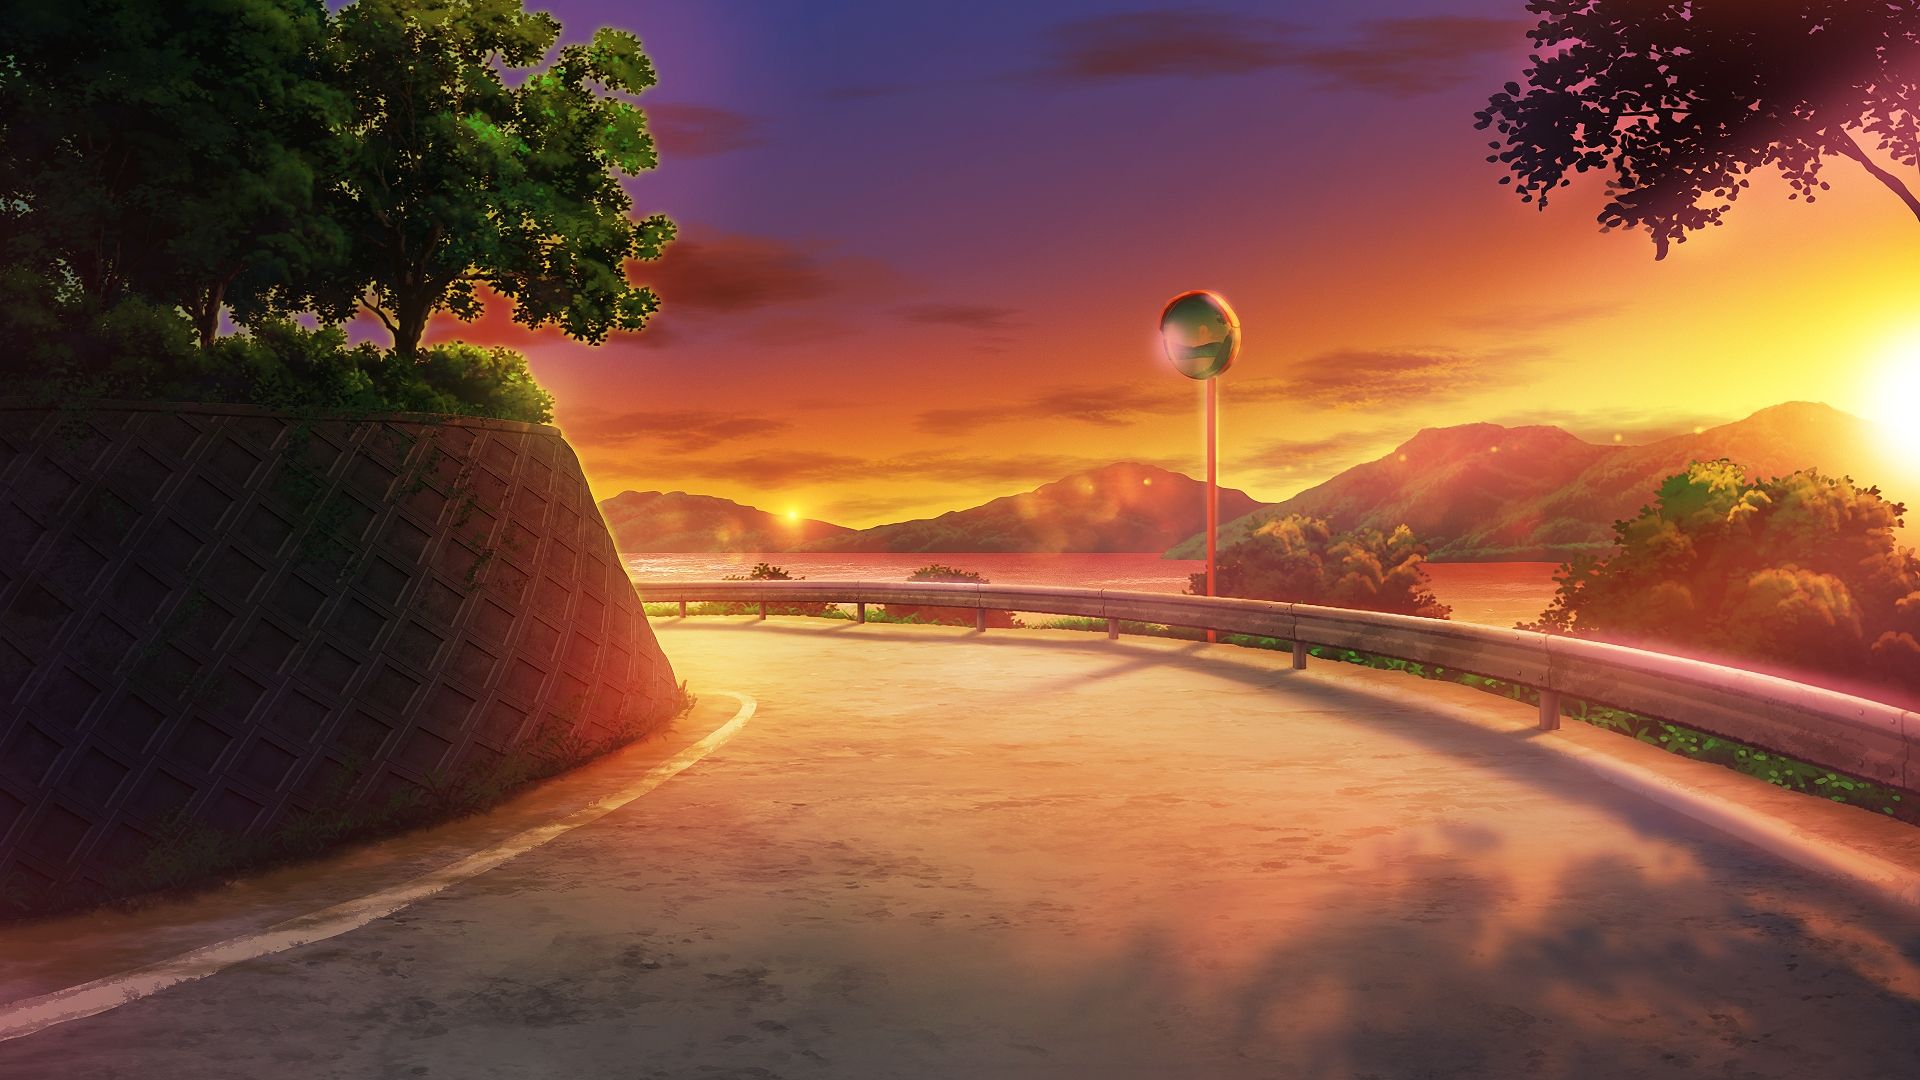 Download 1920x1080 Anime Landscape, Sunset, Scenery, Road, Trees